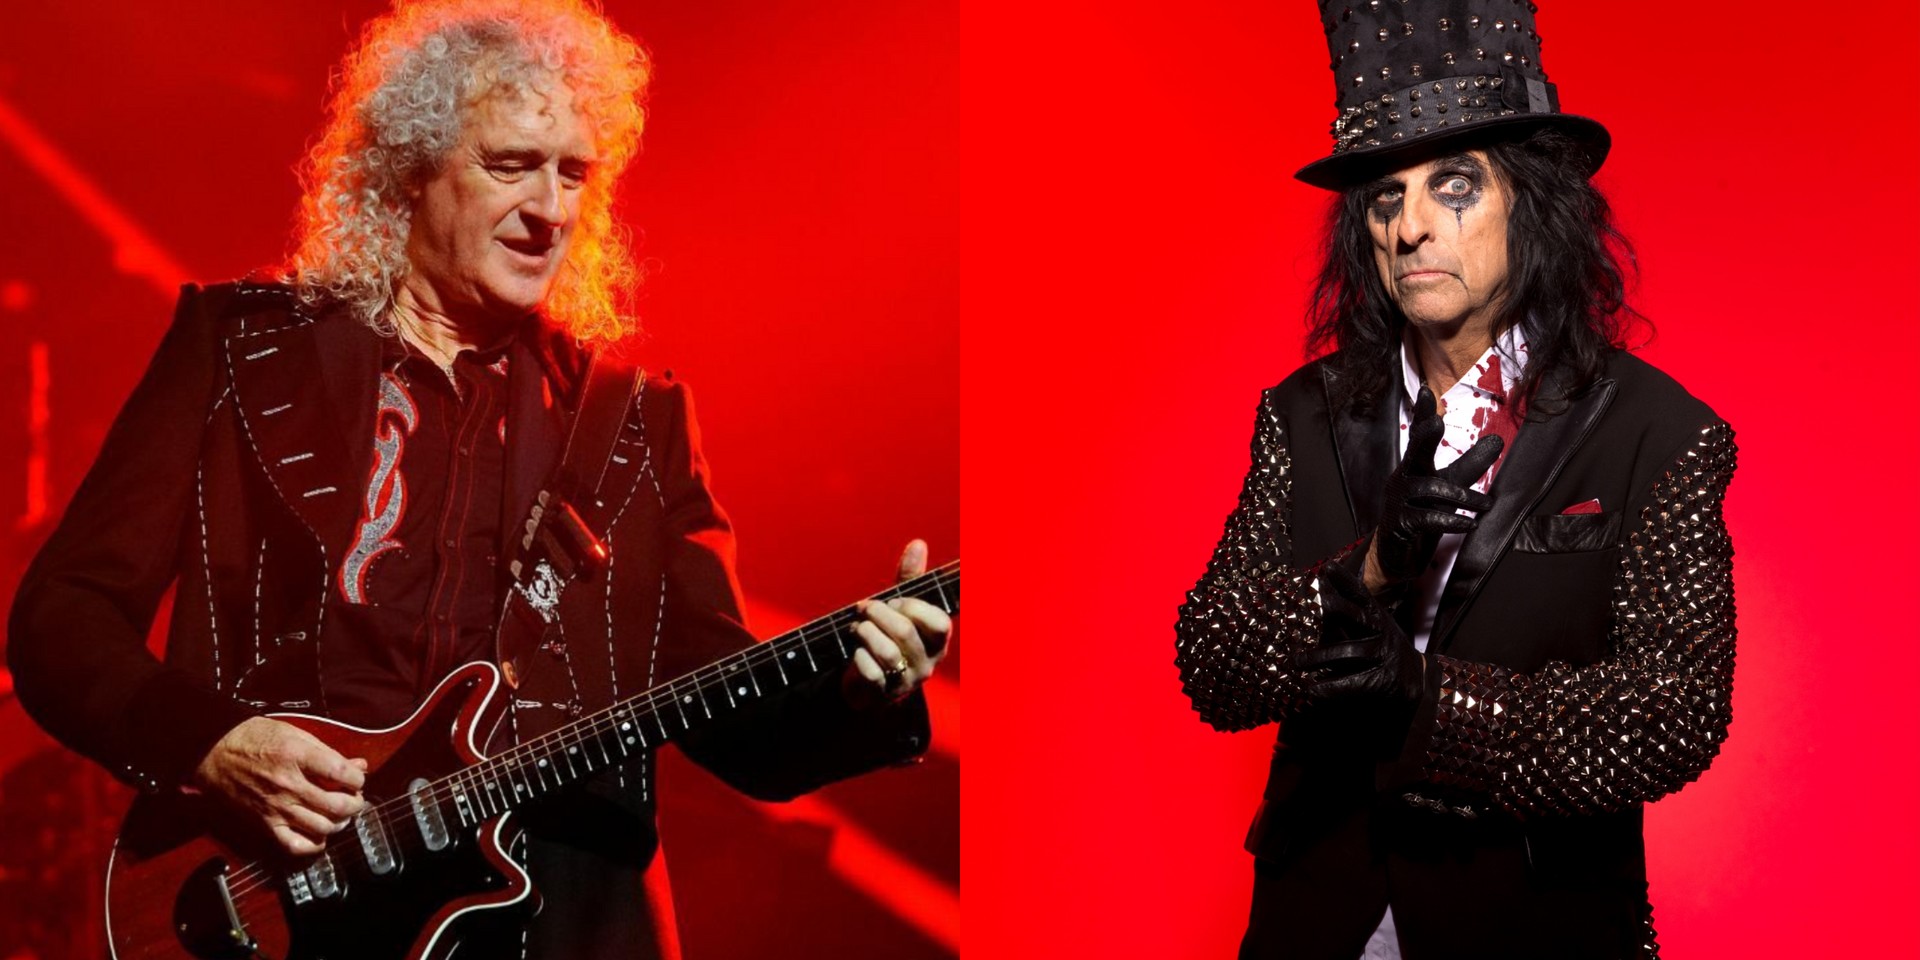 Queen, Alice Cooper and more to perform in Sydney next month for Australian bushfire relief concert